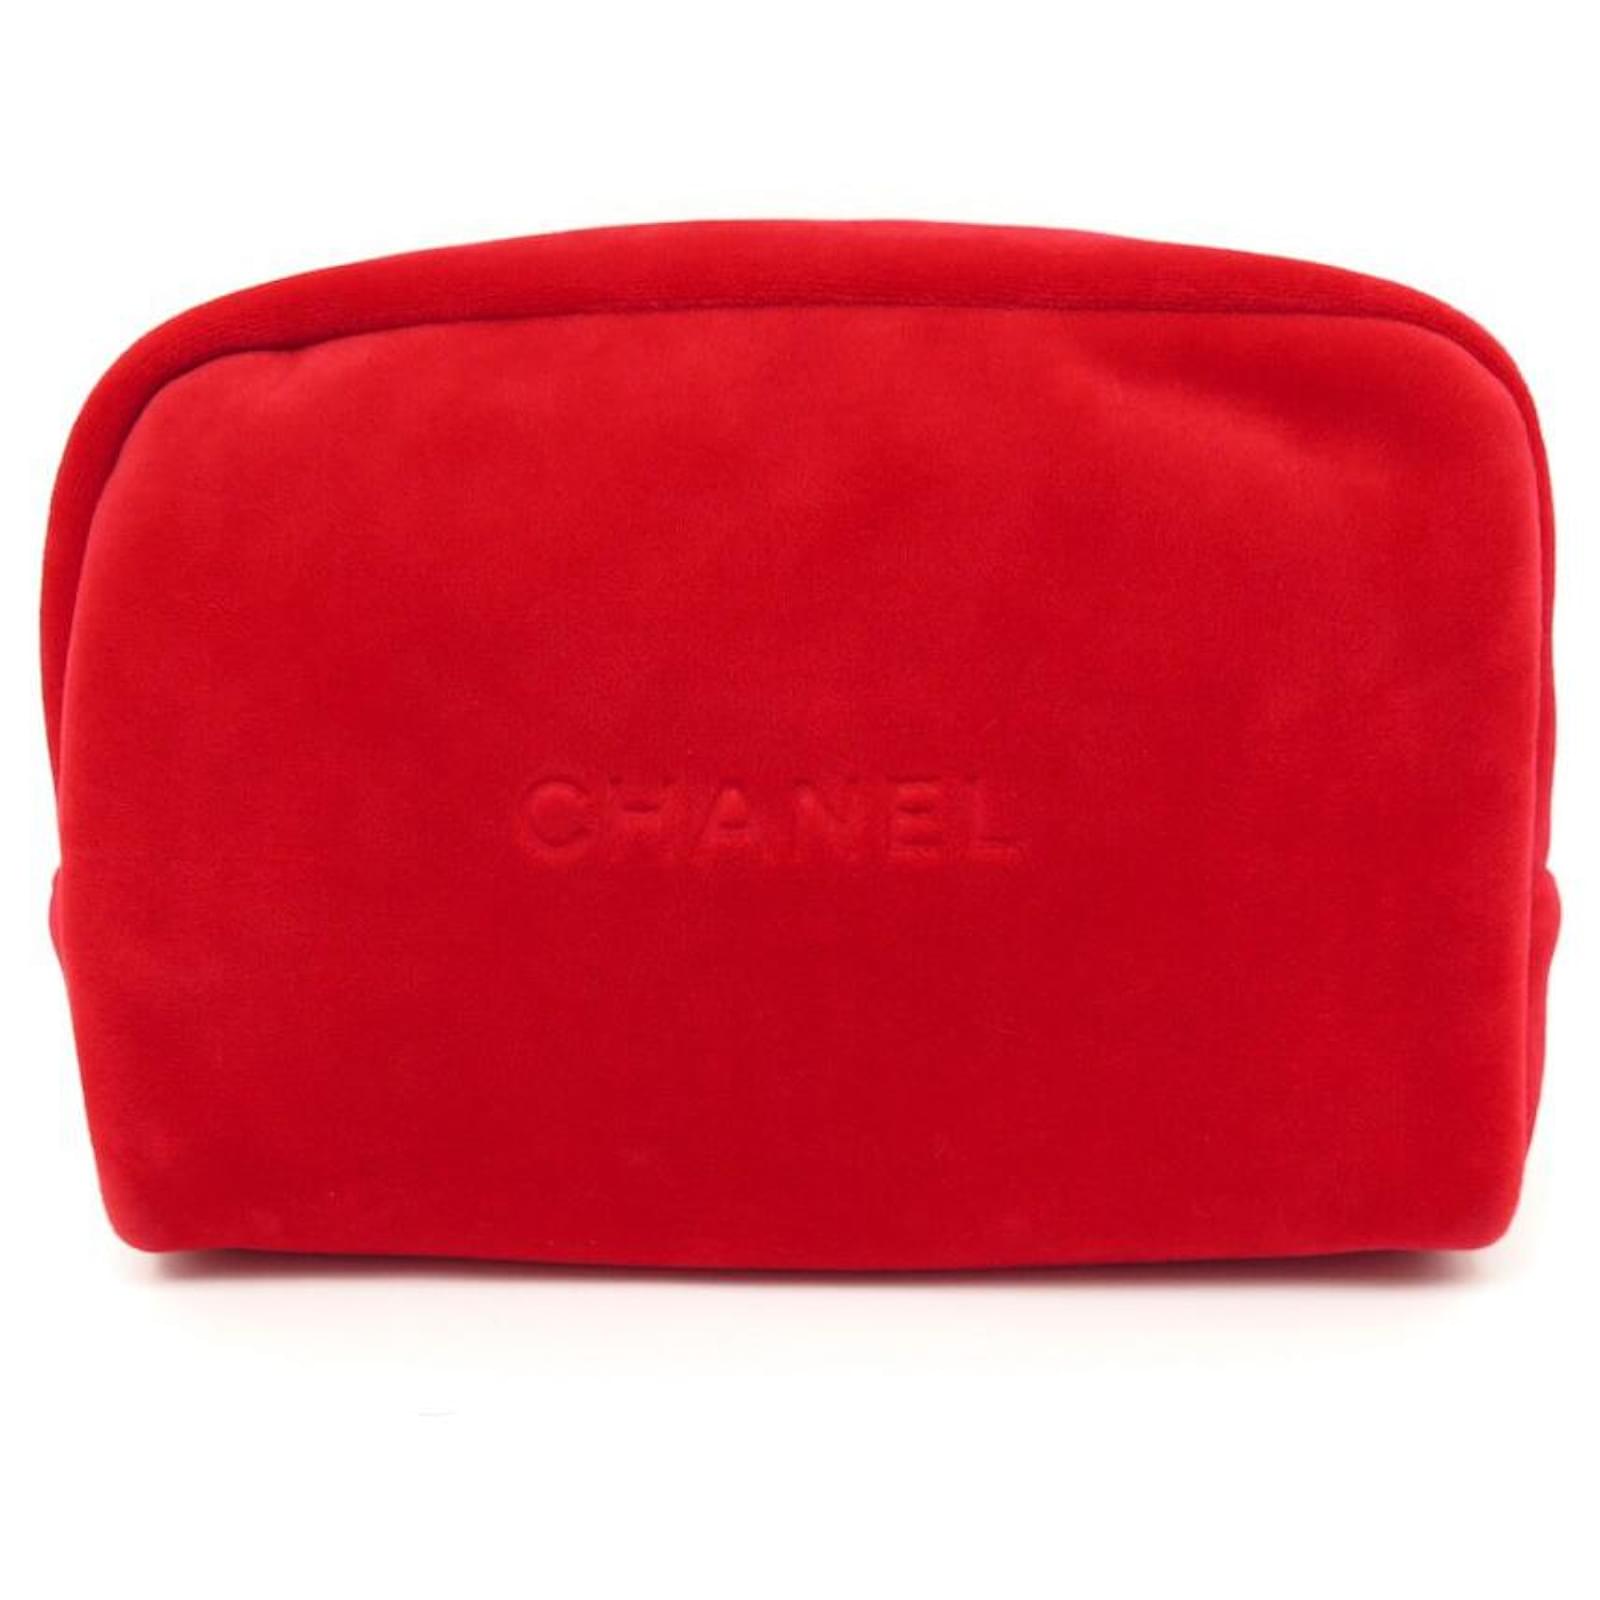 NEW CHANEL BEAUTE TOILETRY BAG IN RED VELVET POLYESTER NEW RED POUCH